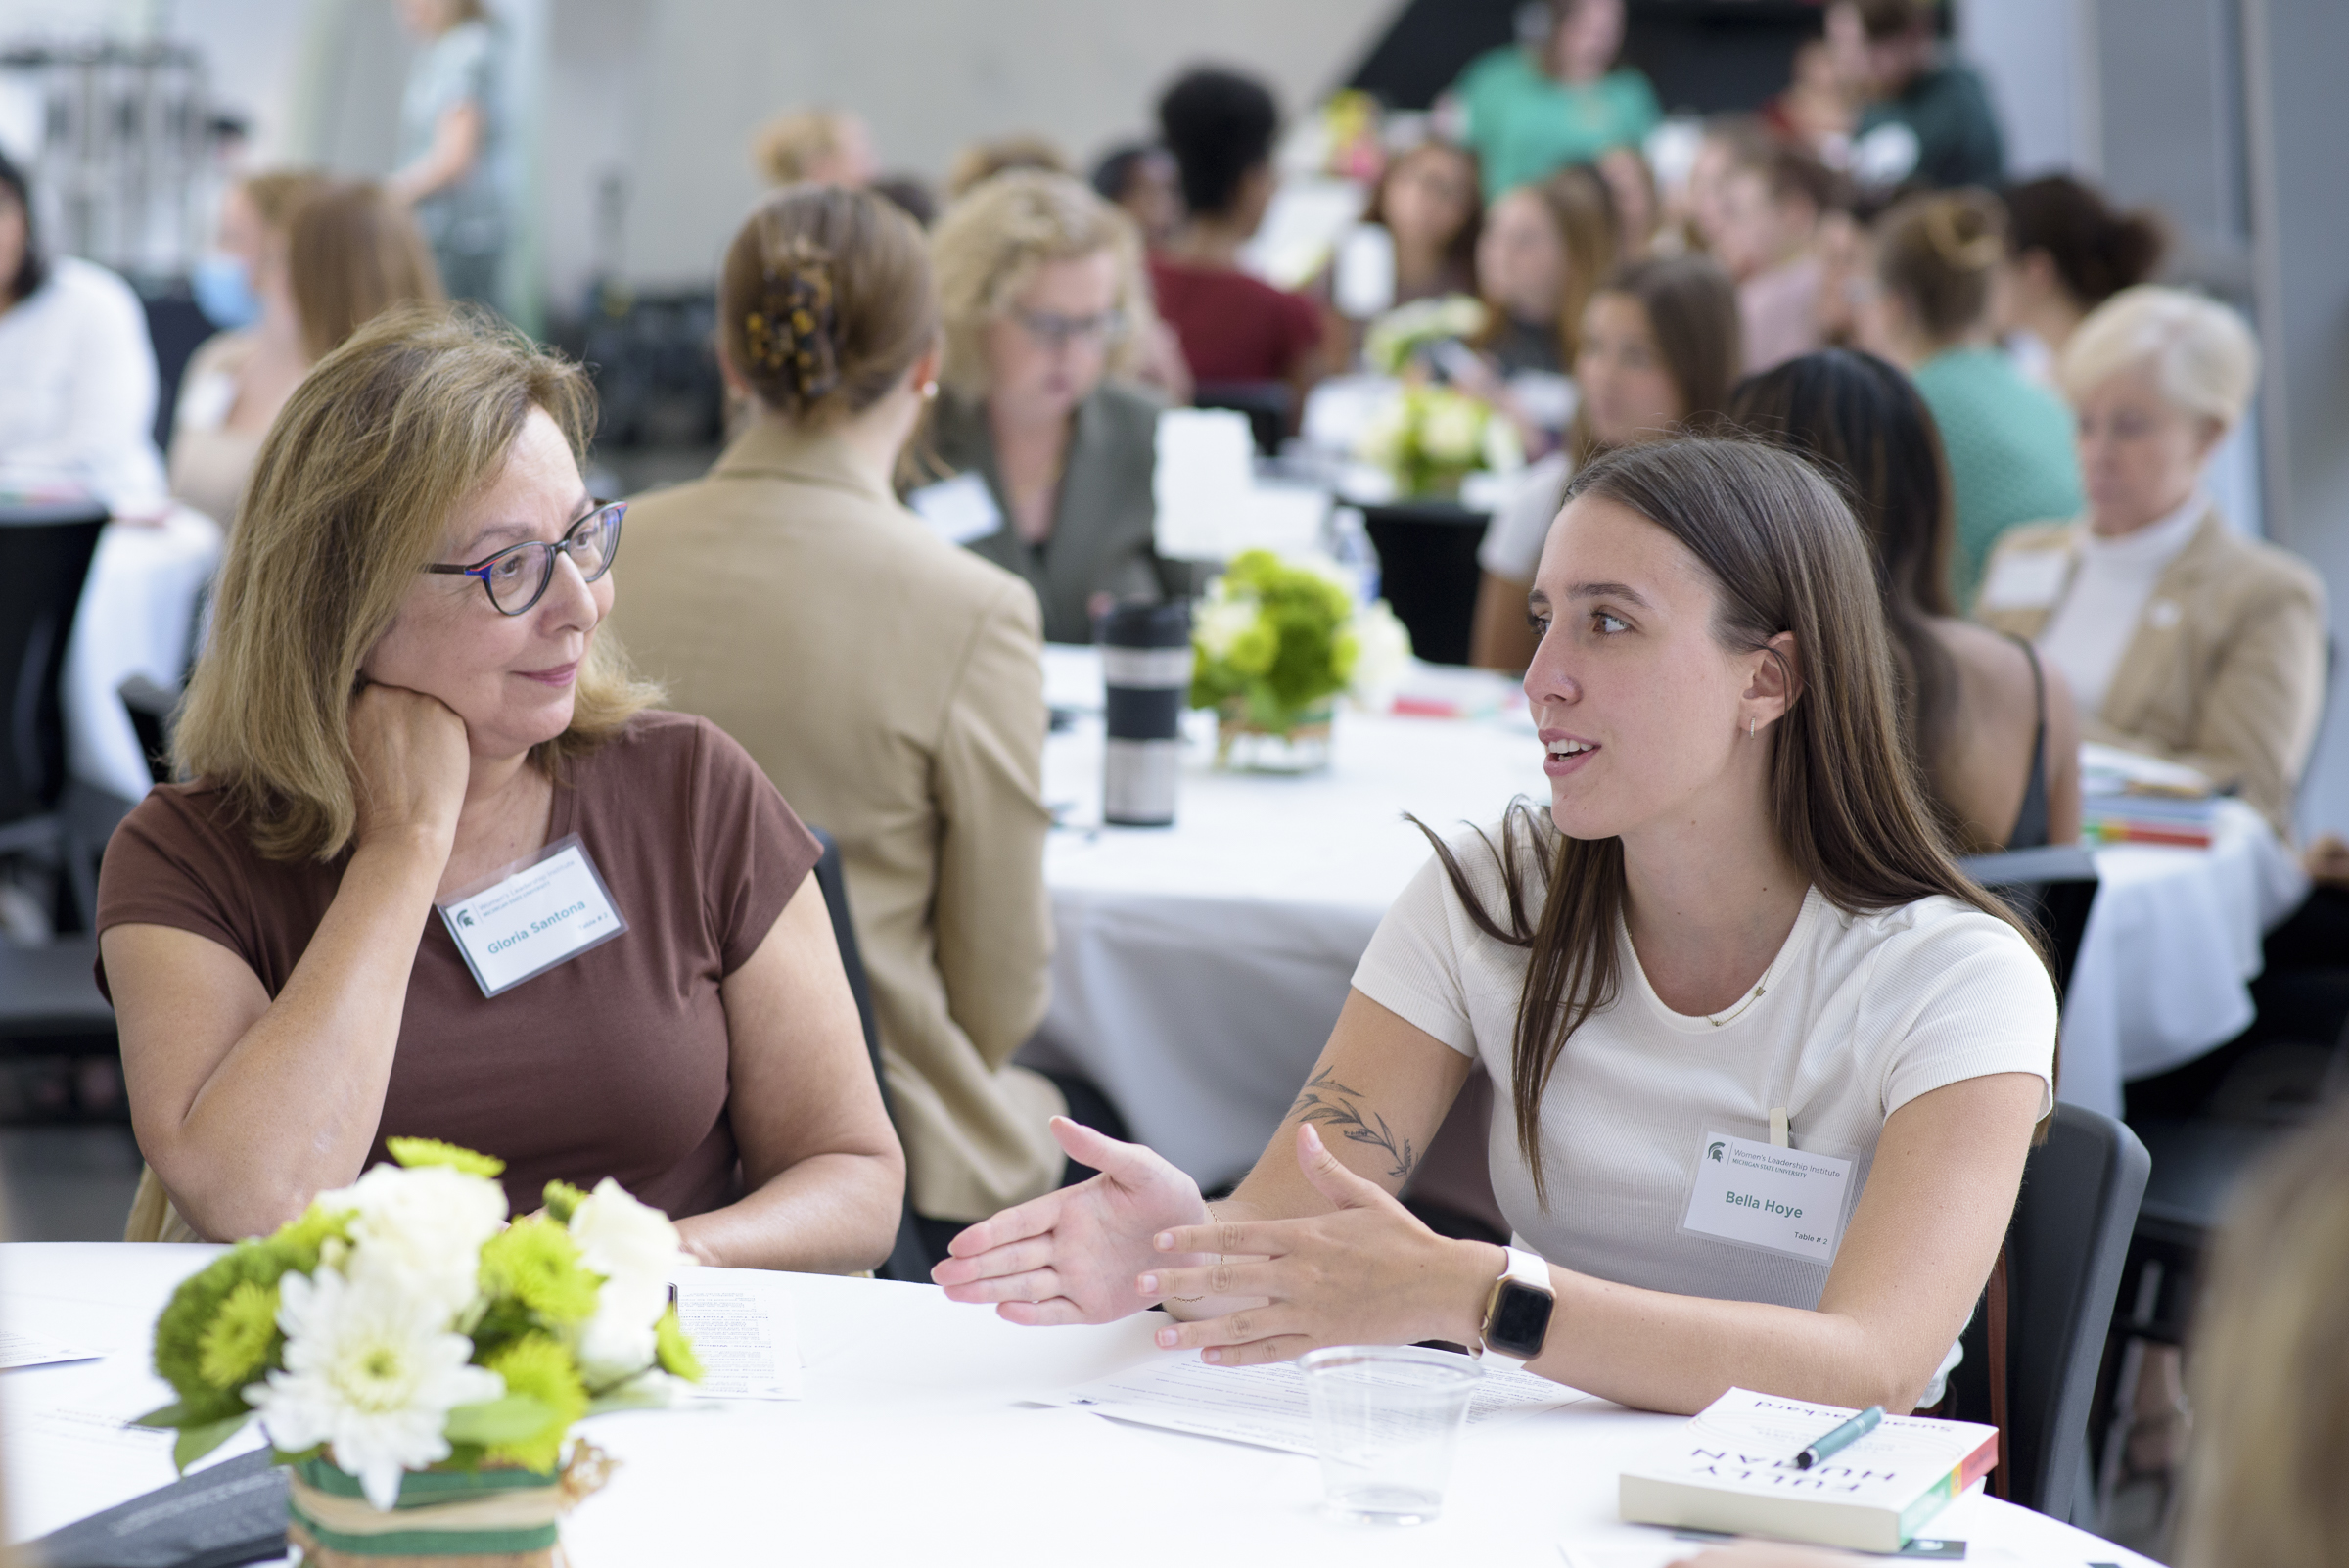 Women's Leadership Institute kicks off fall semester with guest speakers, student workshops